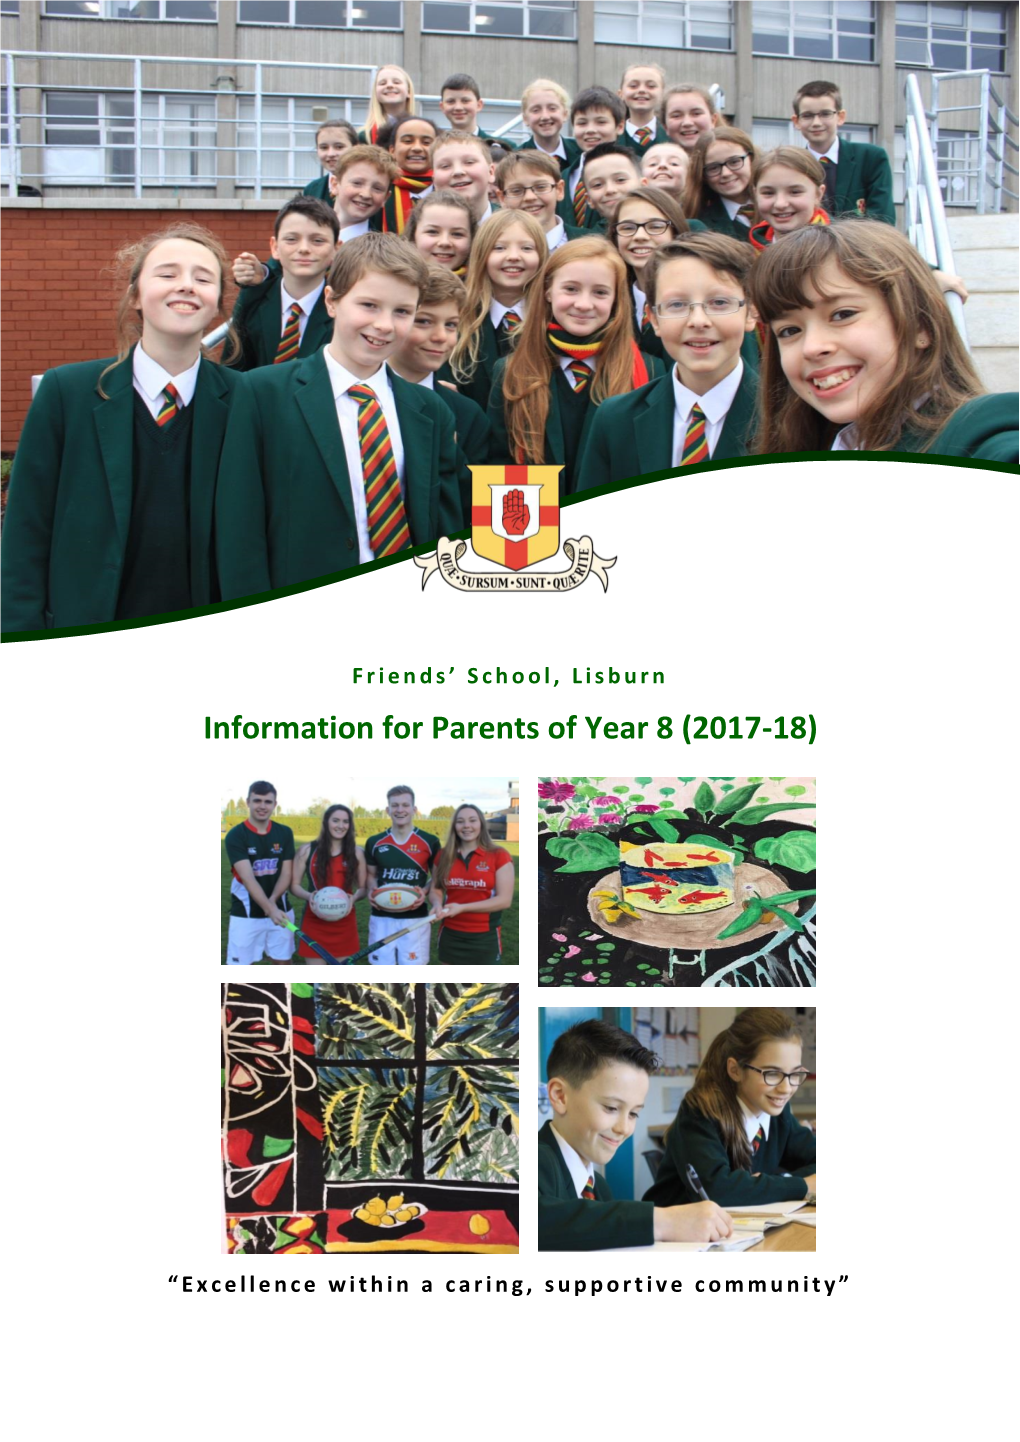 Information for Parents of Year 8 (2017-18)